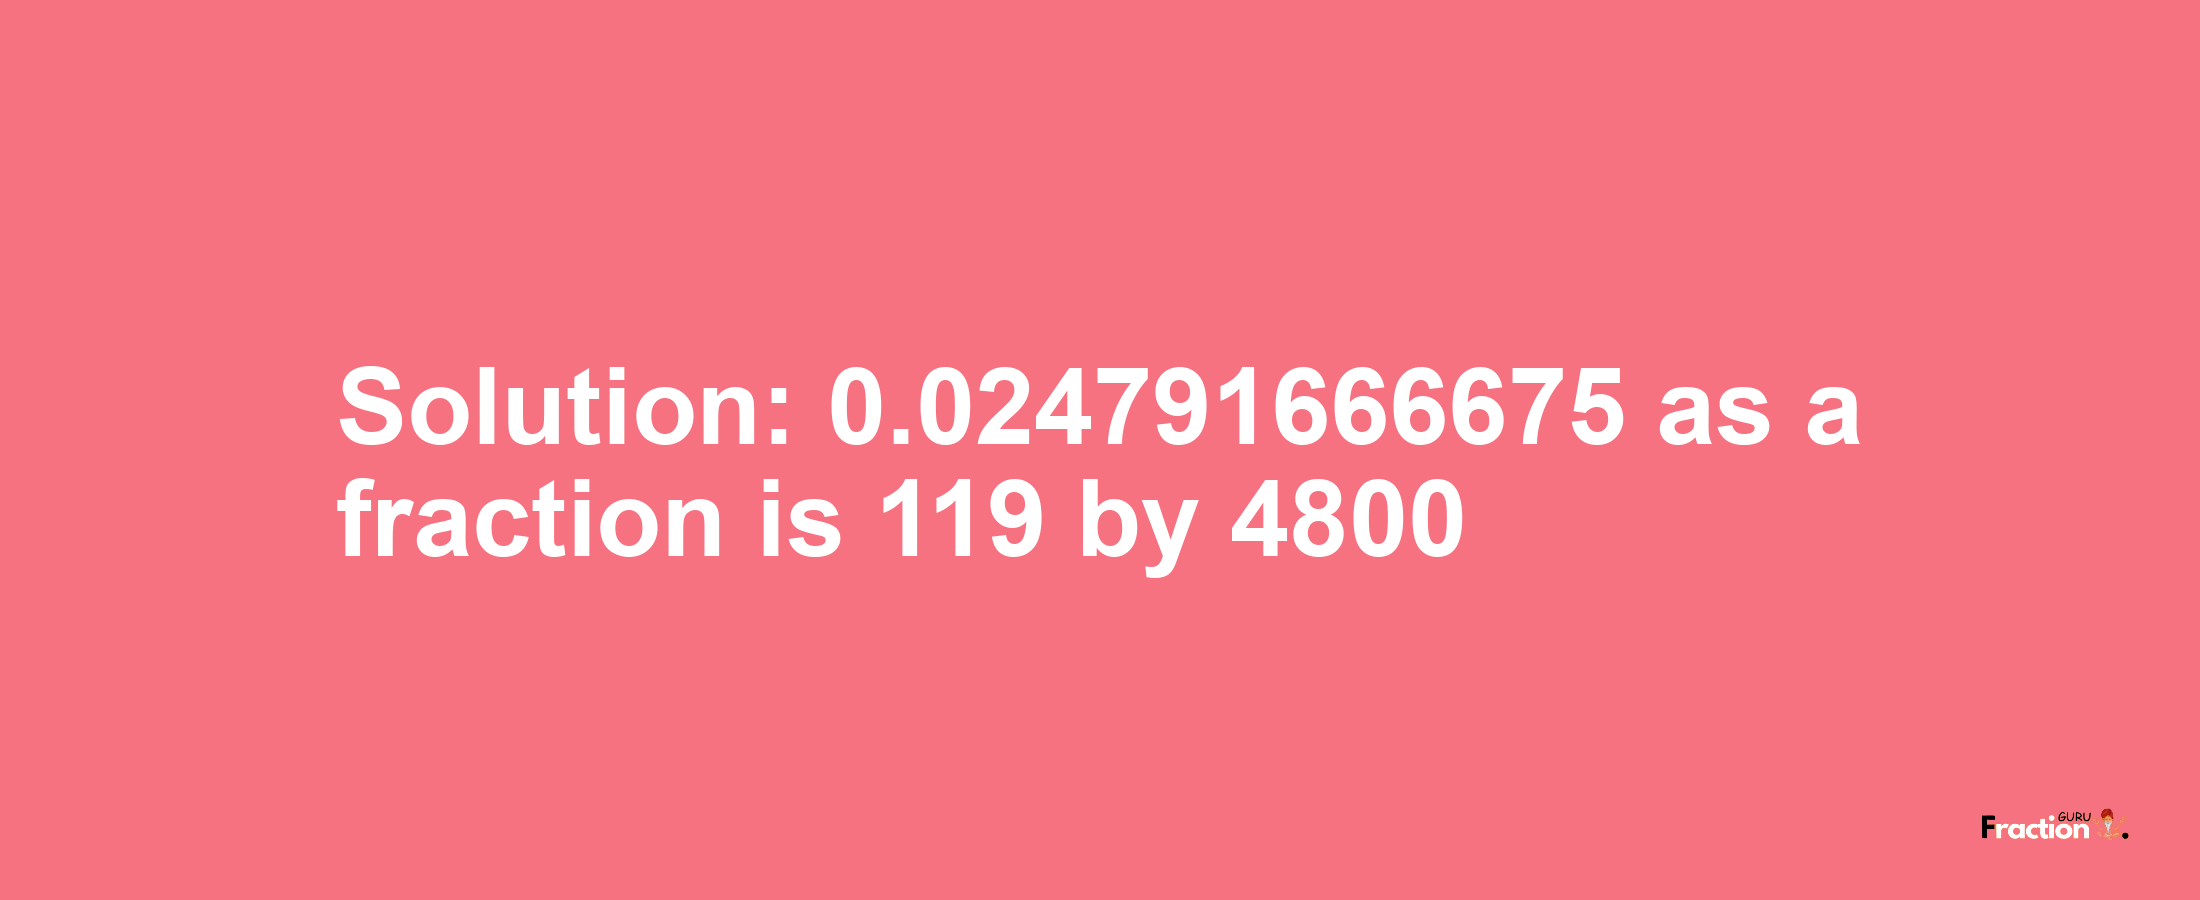 Solution:0.024791666675 as a fraction is 119/4800